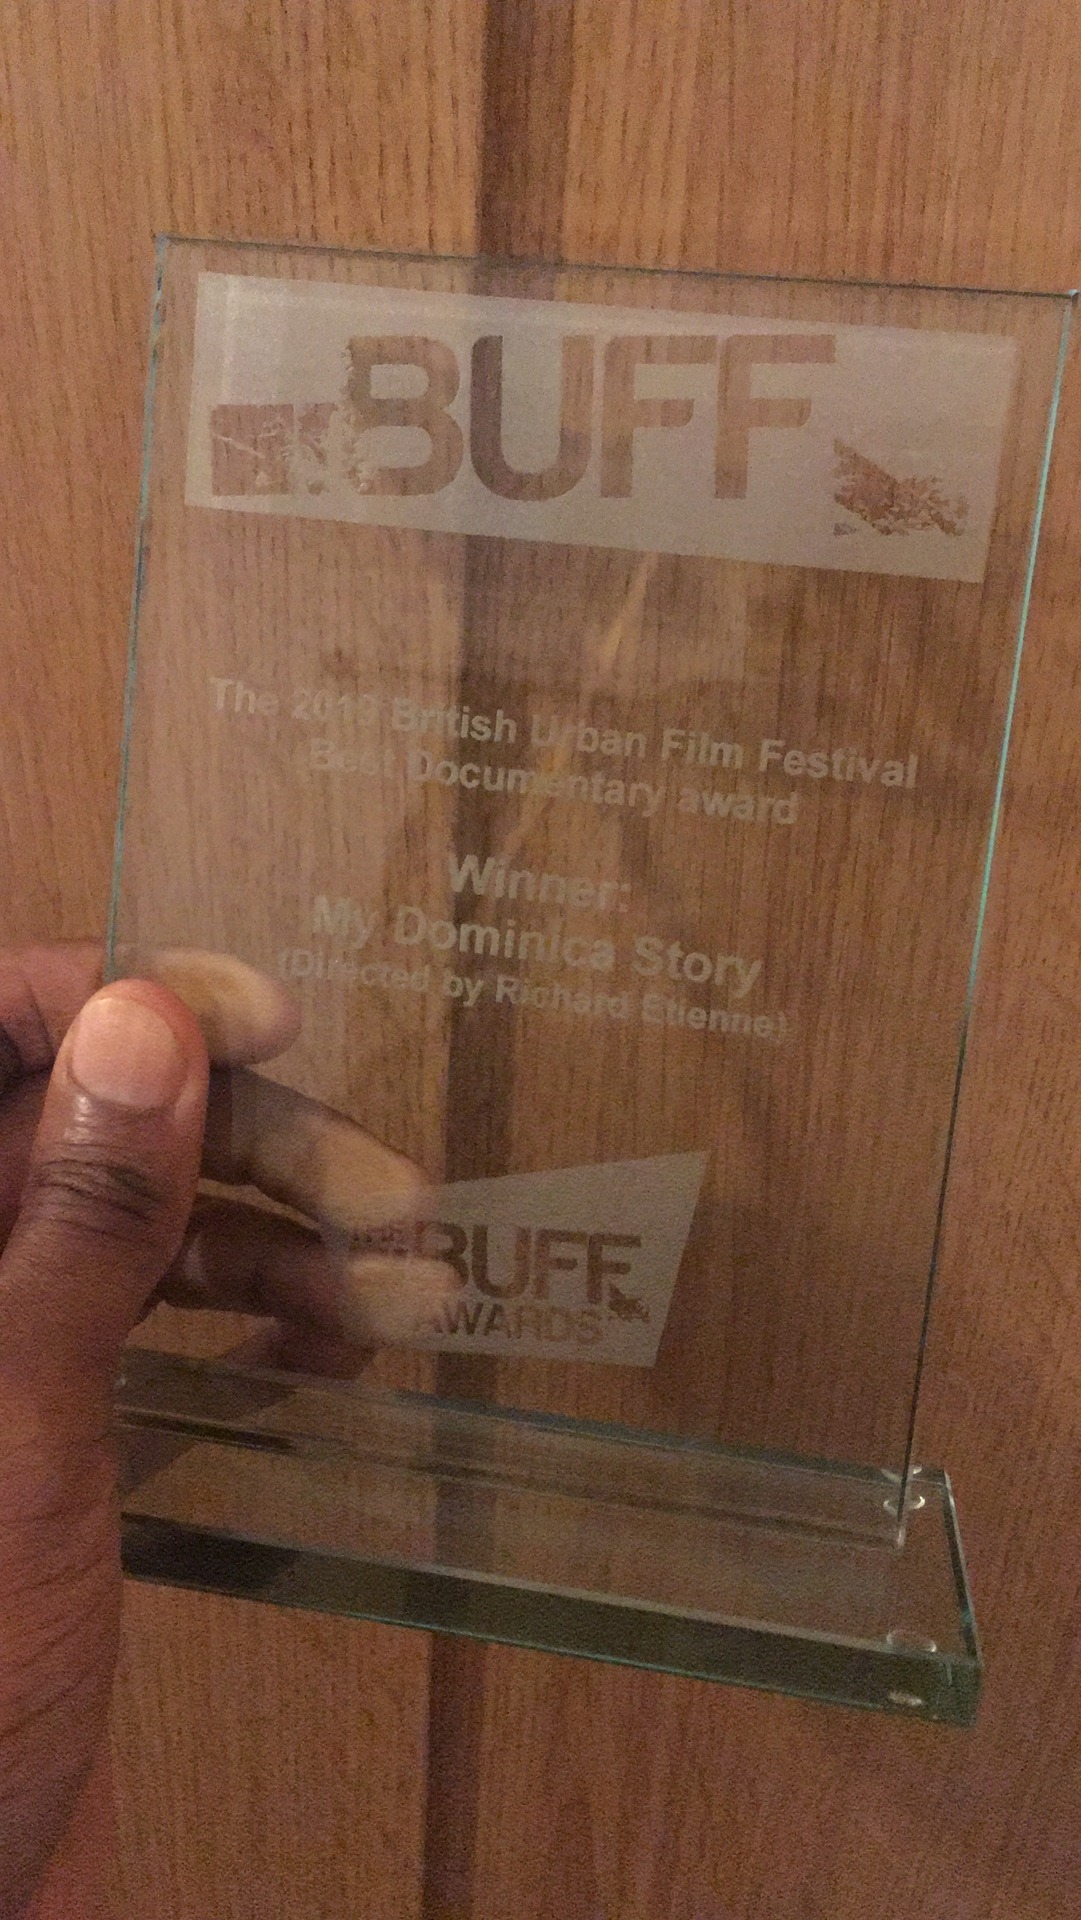 We won!
The iD Project took home the Best Documentary award at the British Urban Film Festival in London last night.
More photos and info to come…